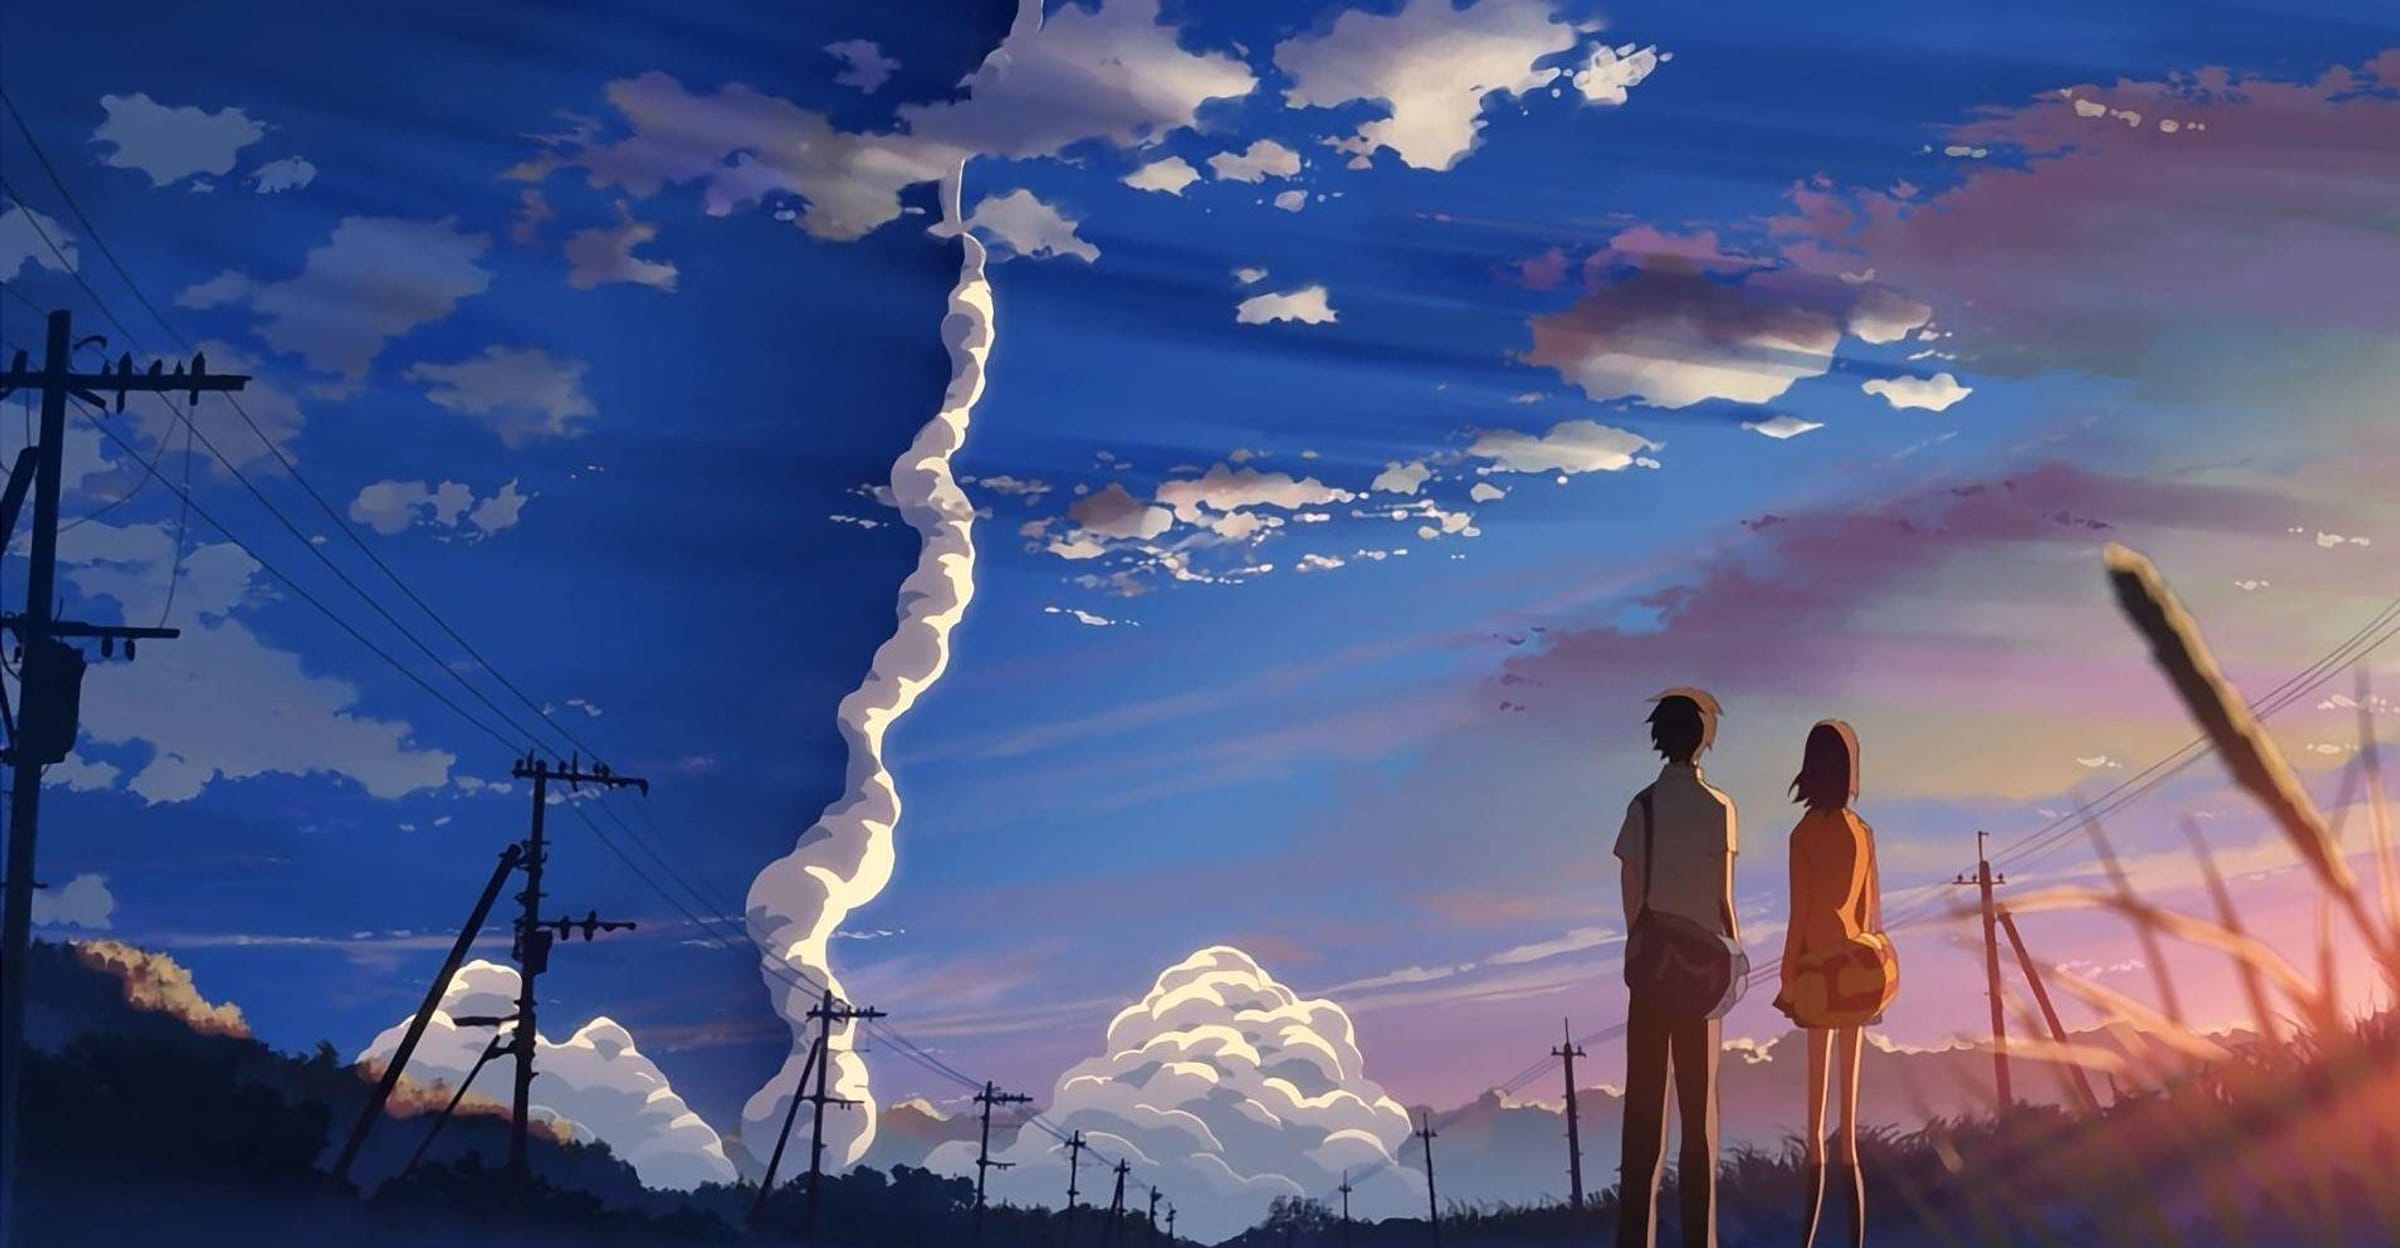 7 Recommended Action Romance Anime Full of Tension - Sprinkled with a Love  Story that Will Make You Emotional